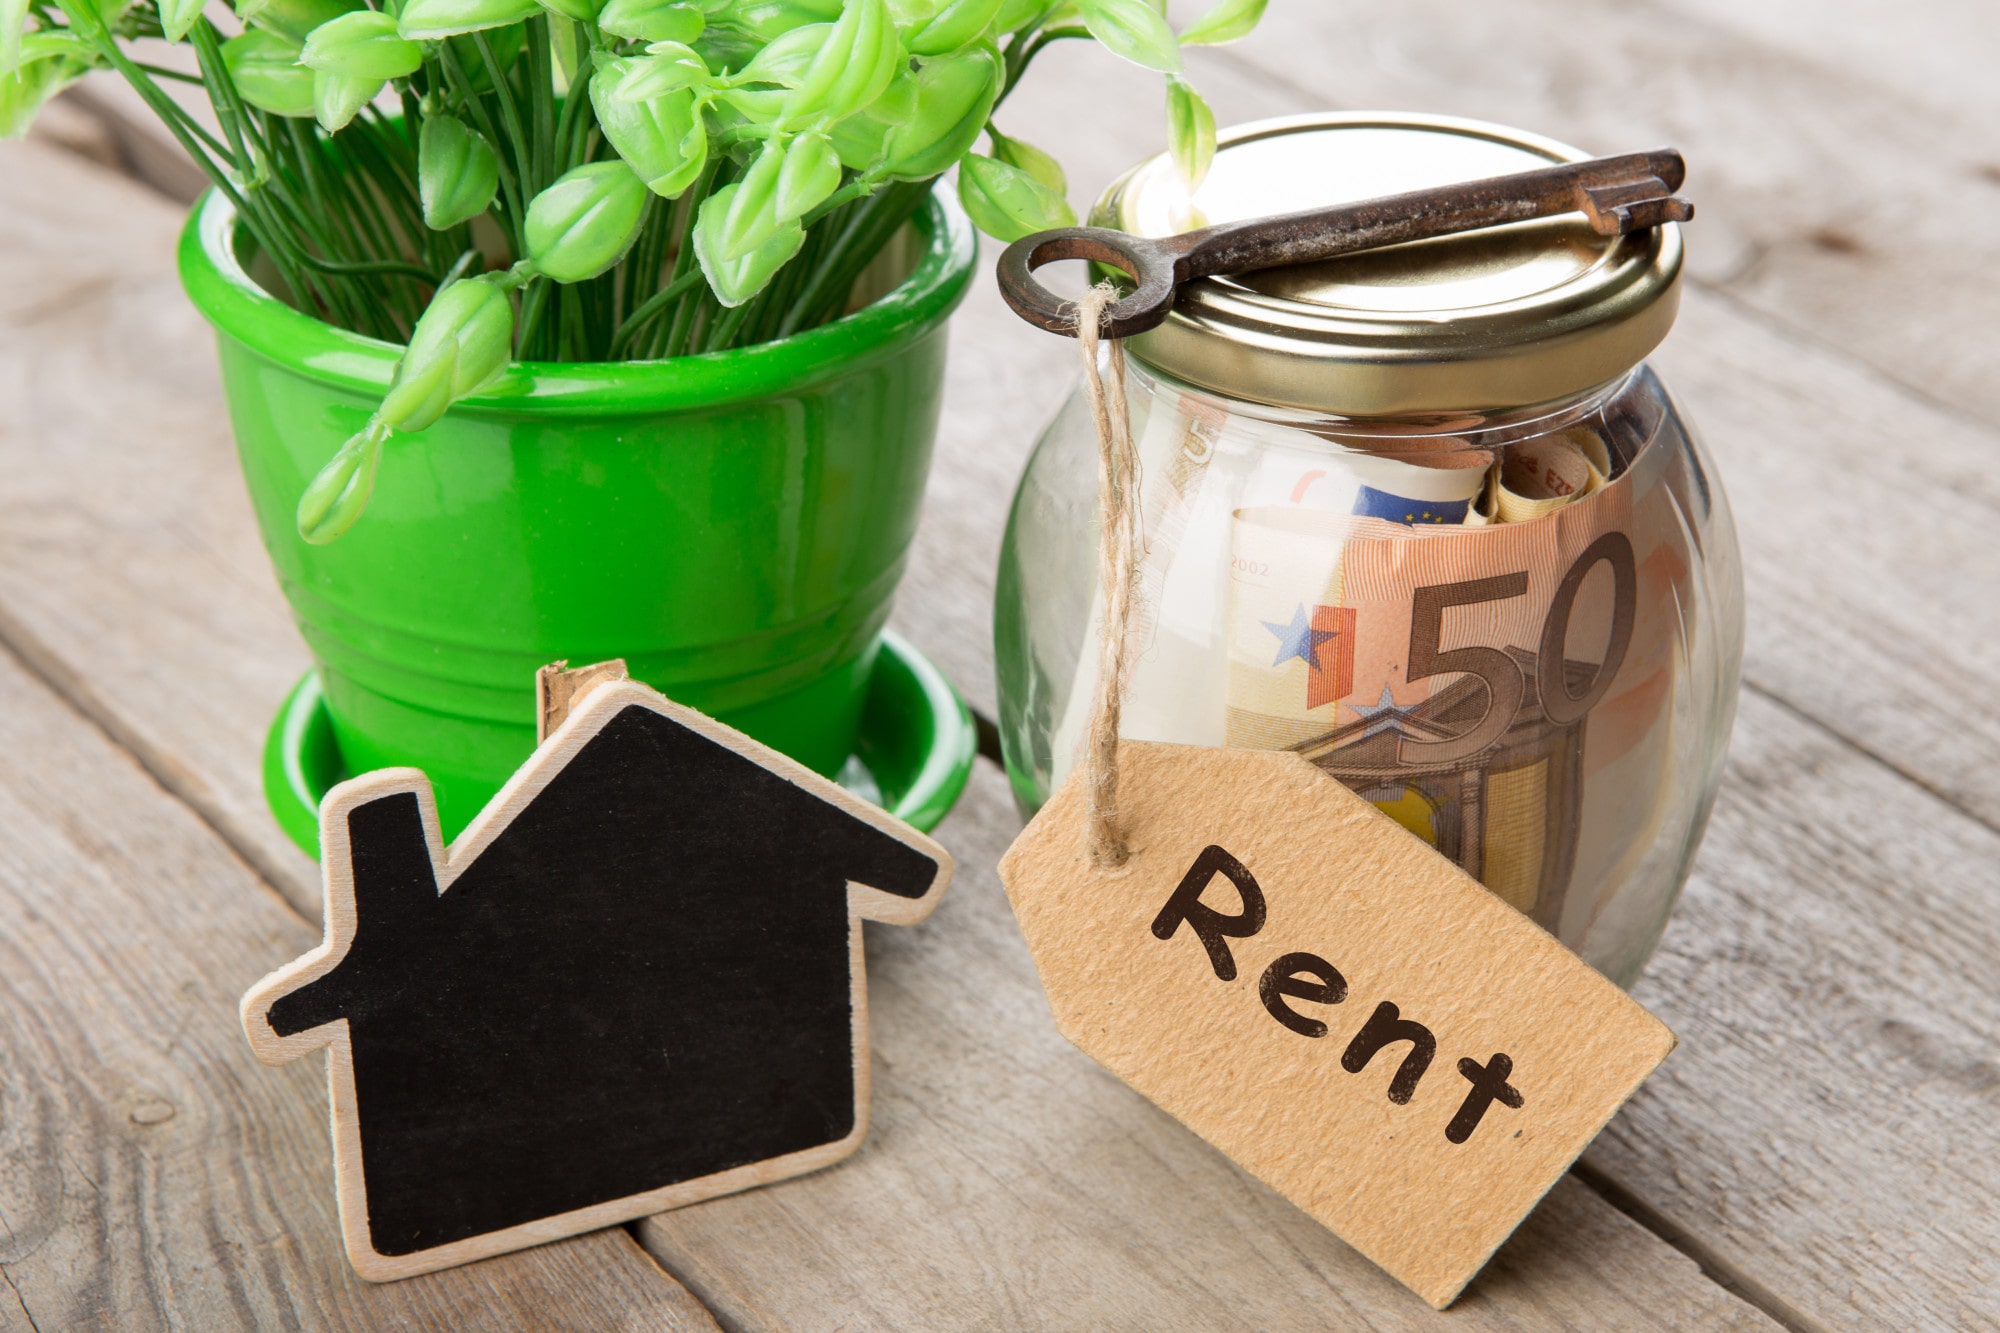 Common Rent Collection Problems and How to Prevent Them